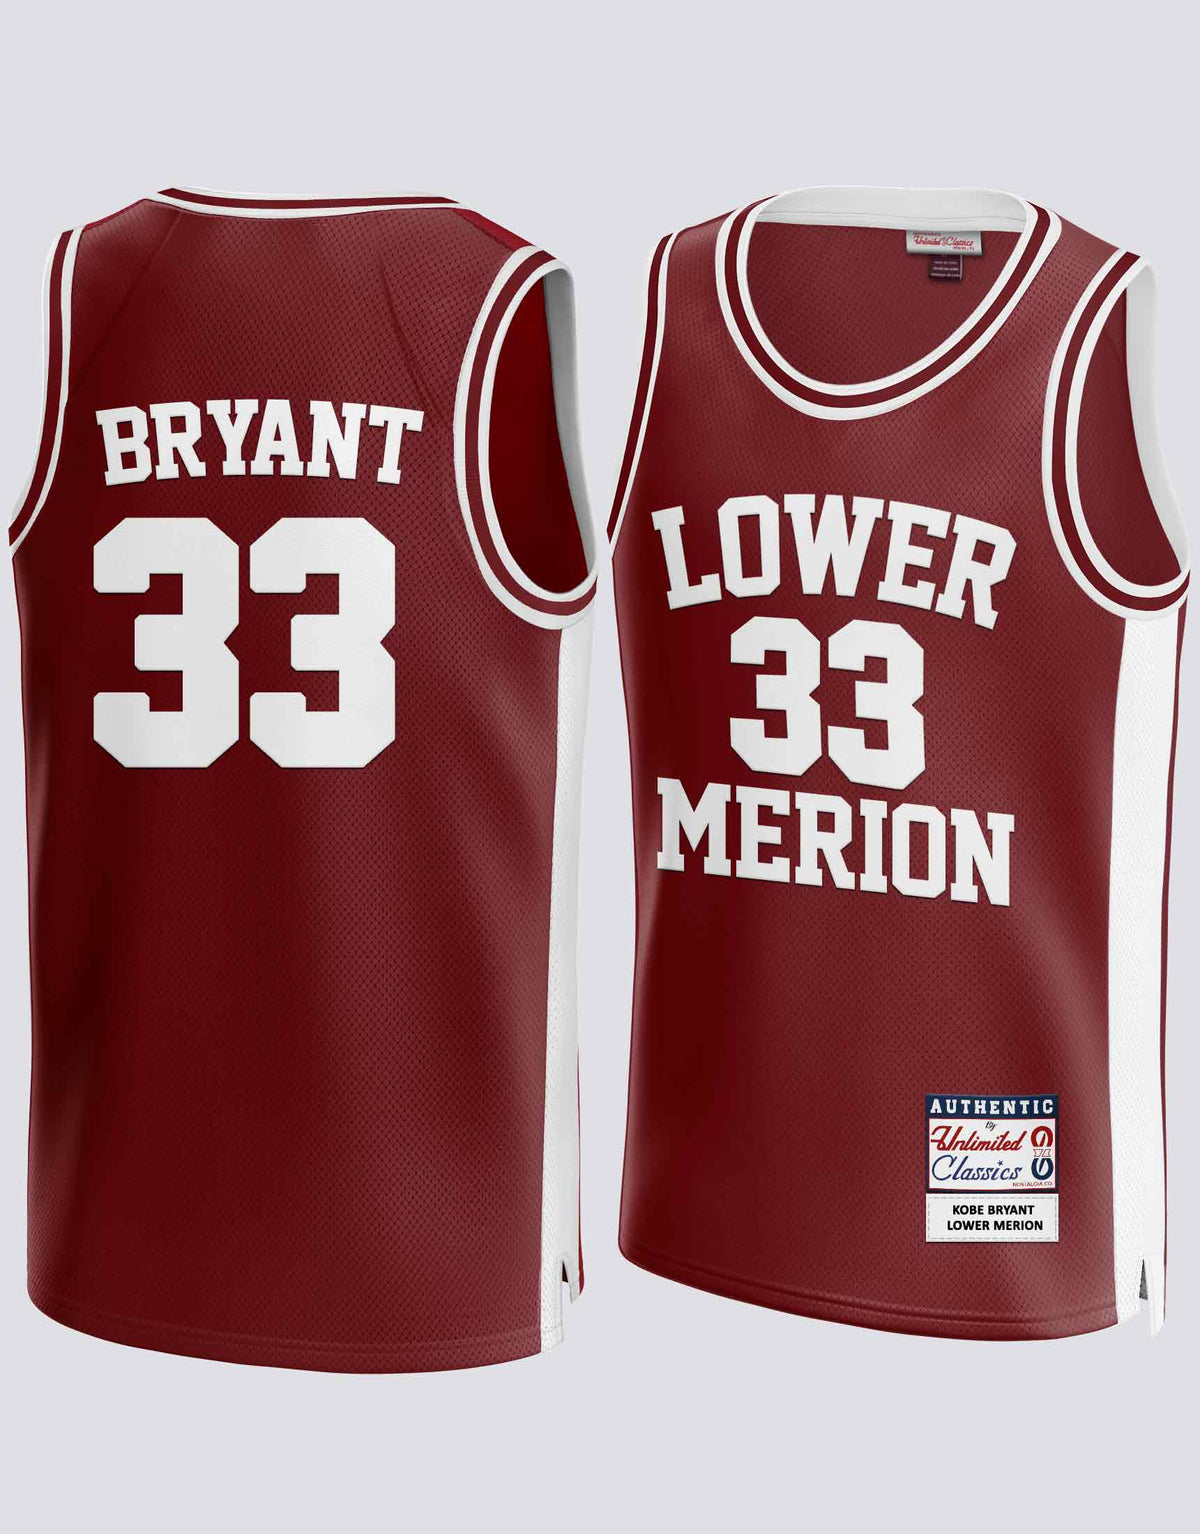 Iconic Kobe Bryant High School Jersey From Lower Merion High